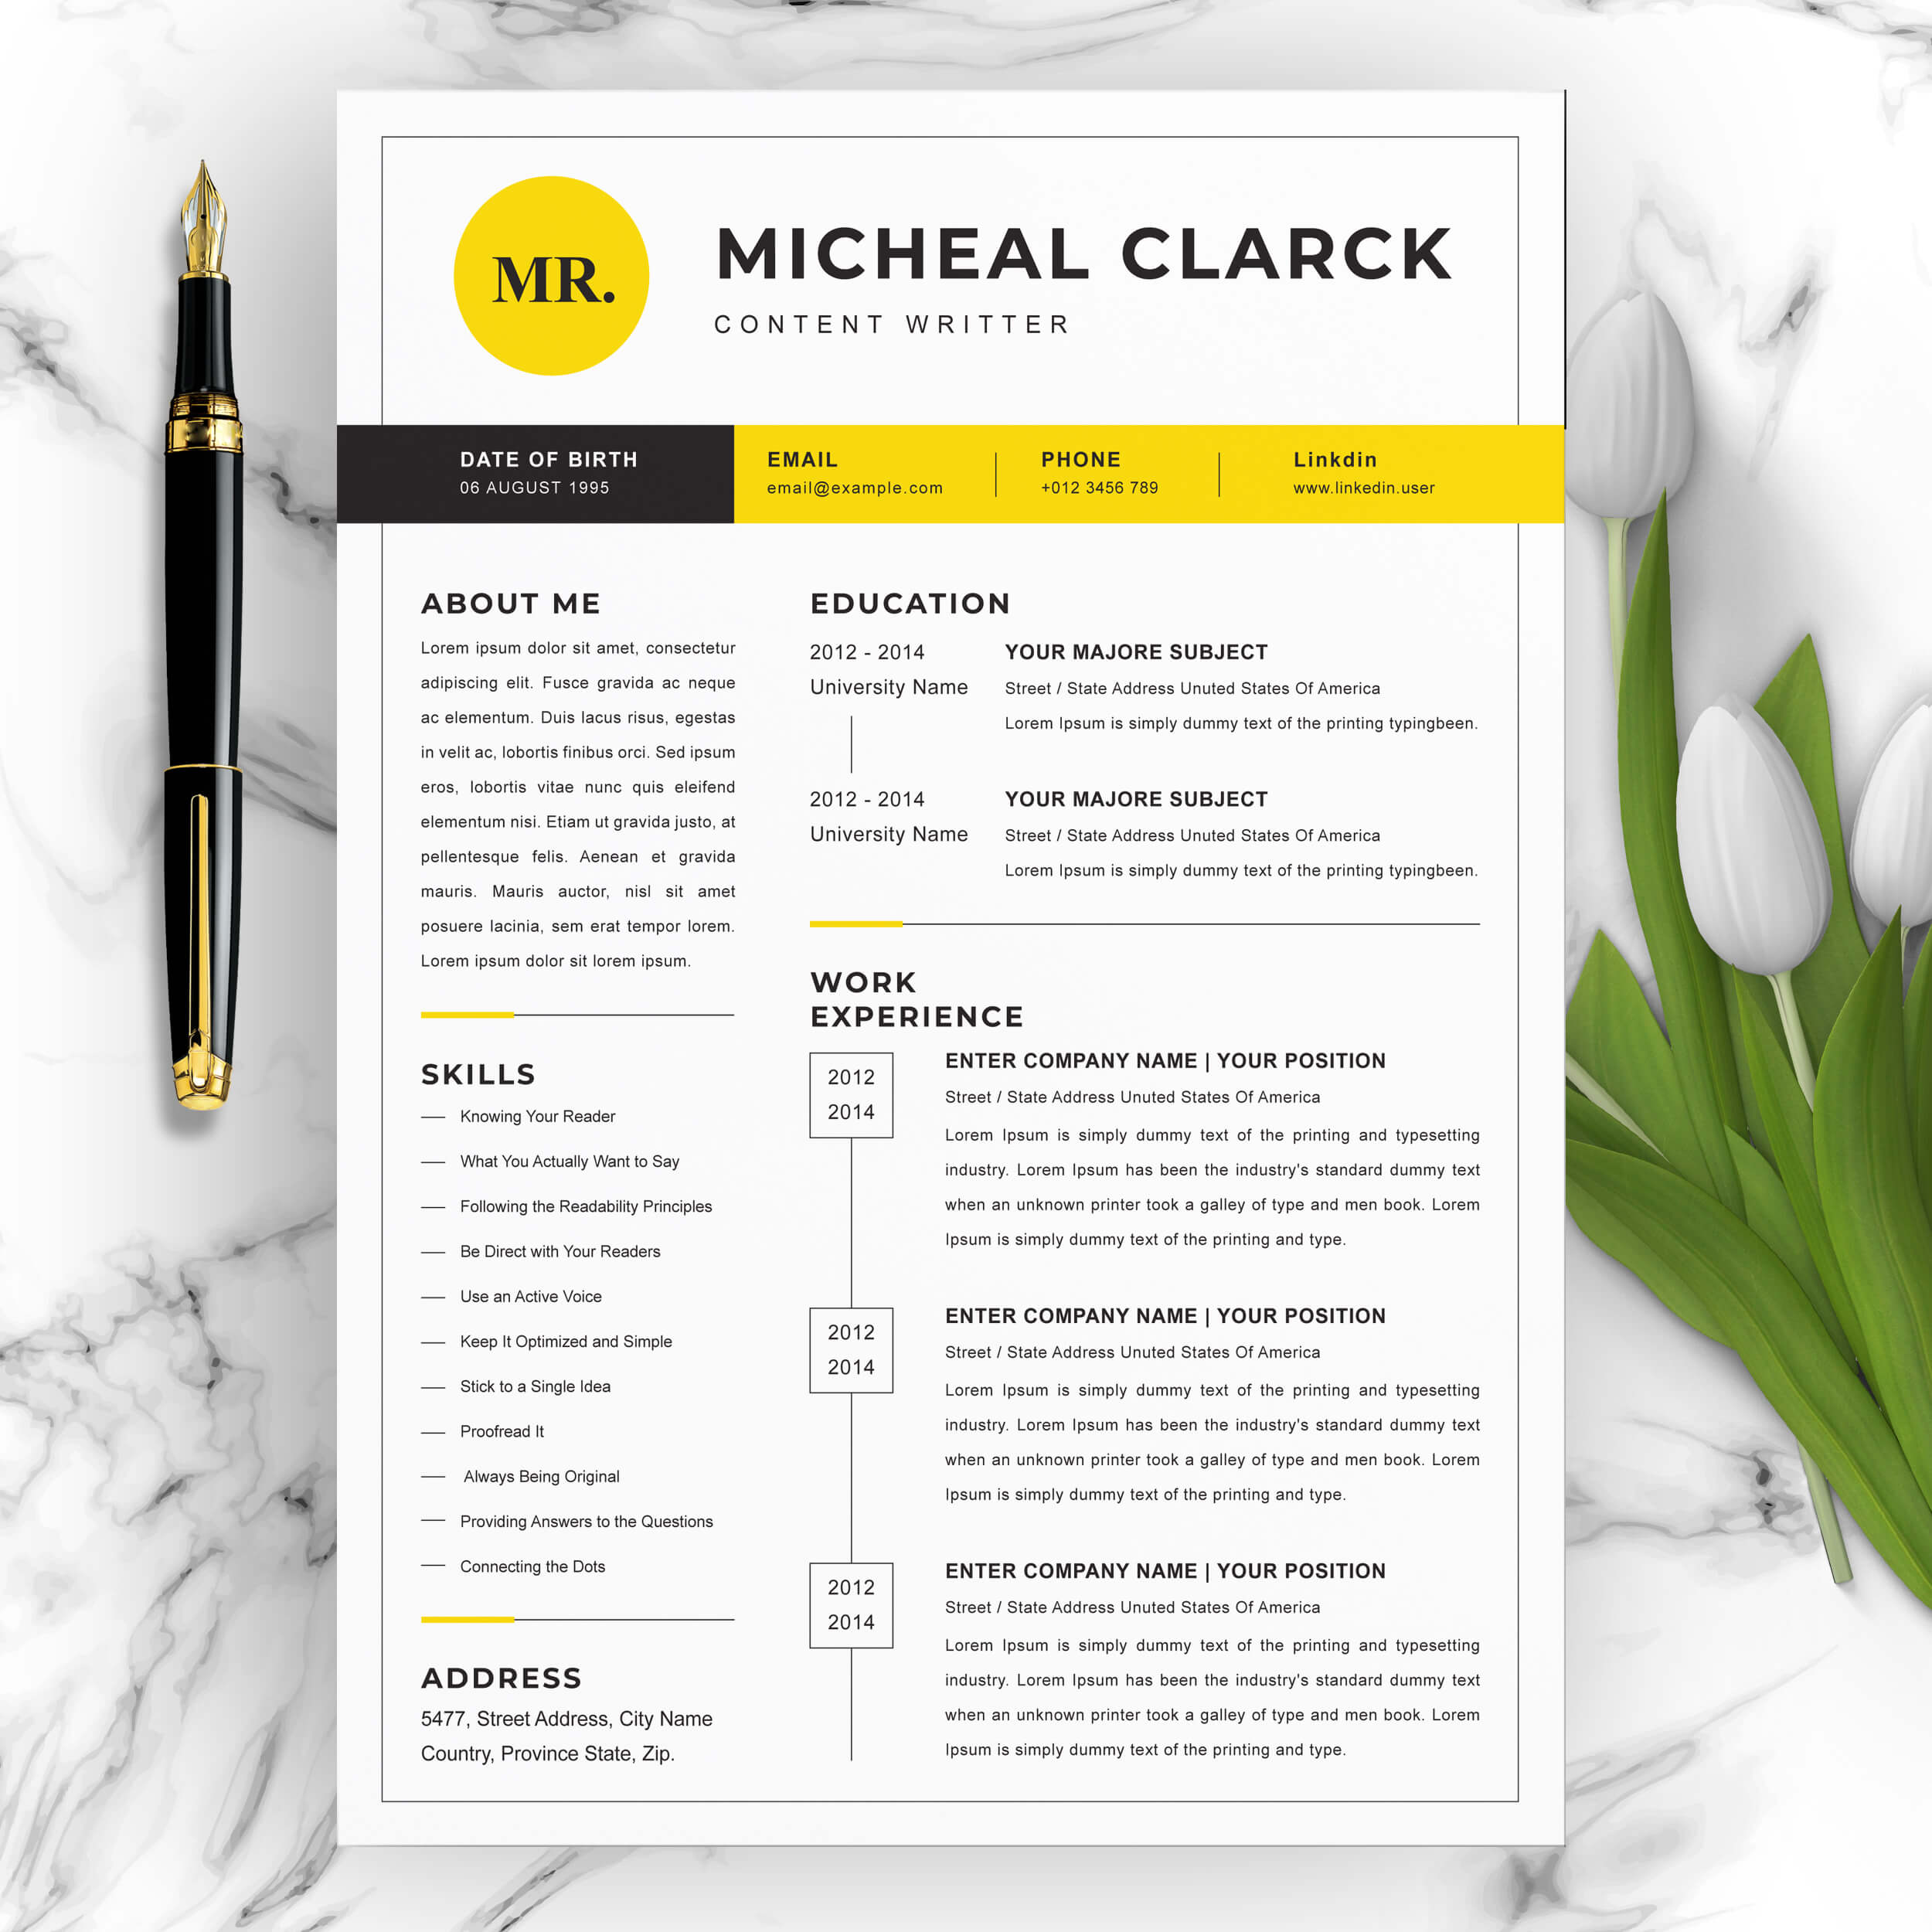 CONTENT WRITER RESUME TEMPLATE | CV TEMPLATE WORD (DOCX) FORMAT cover image.